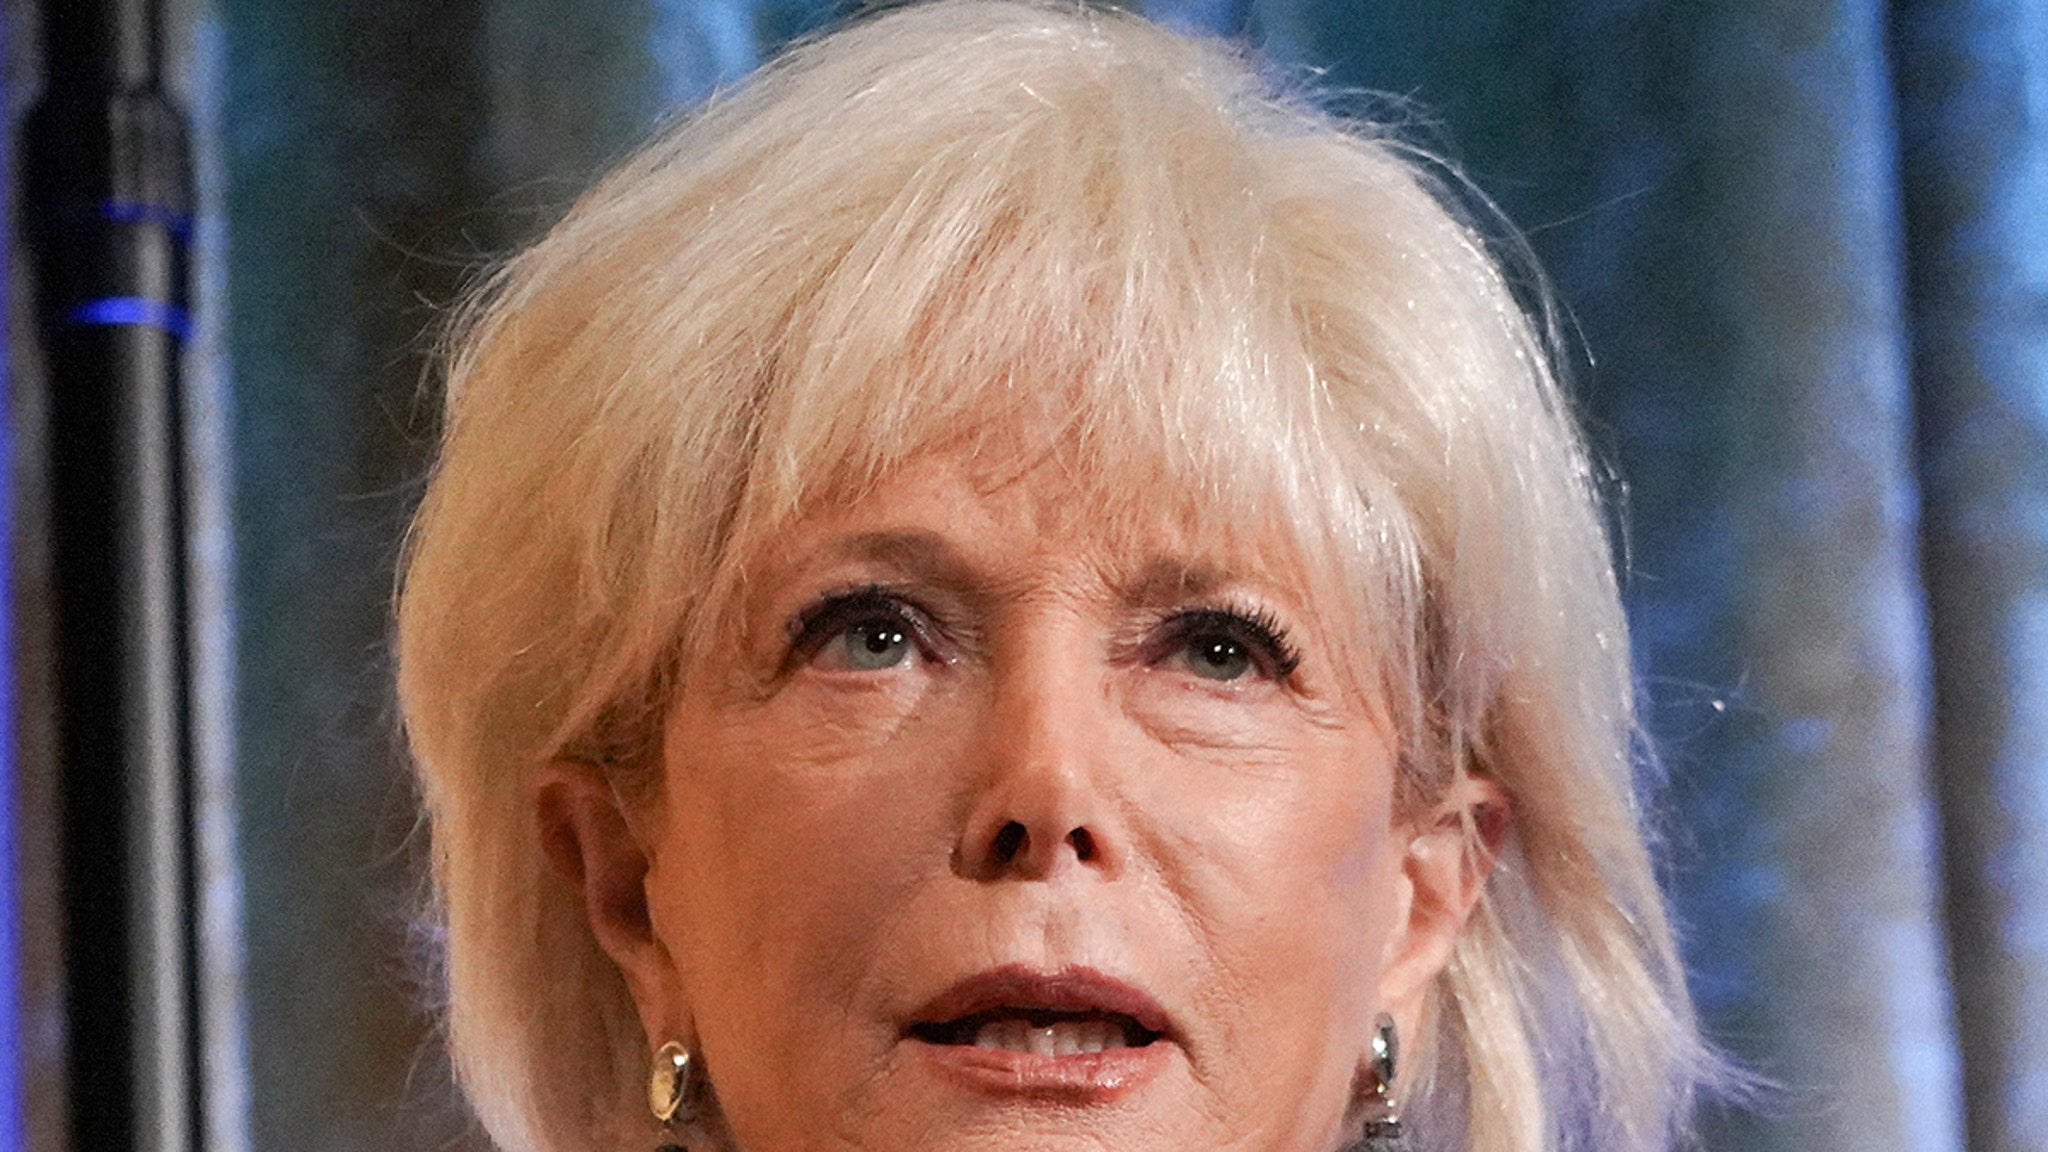 Lesley Stahl Gets Security Due to Death Threat After Trump Interview